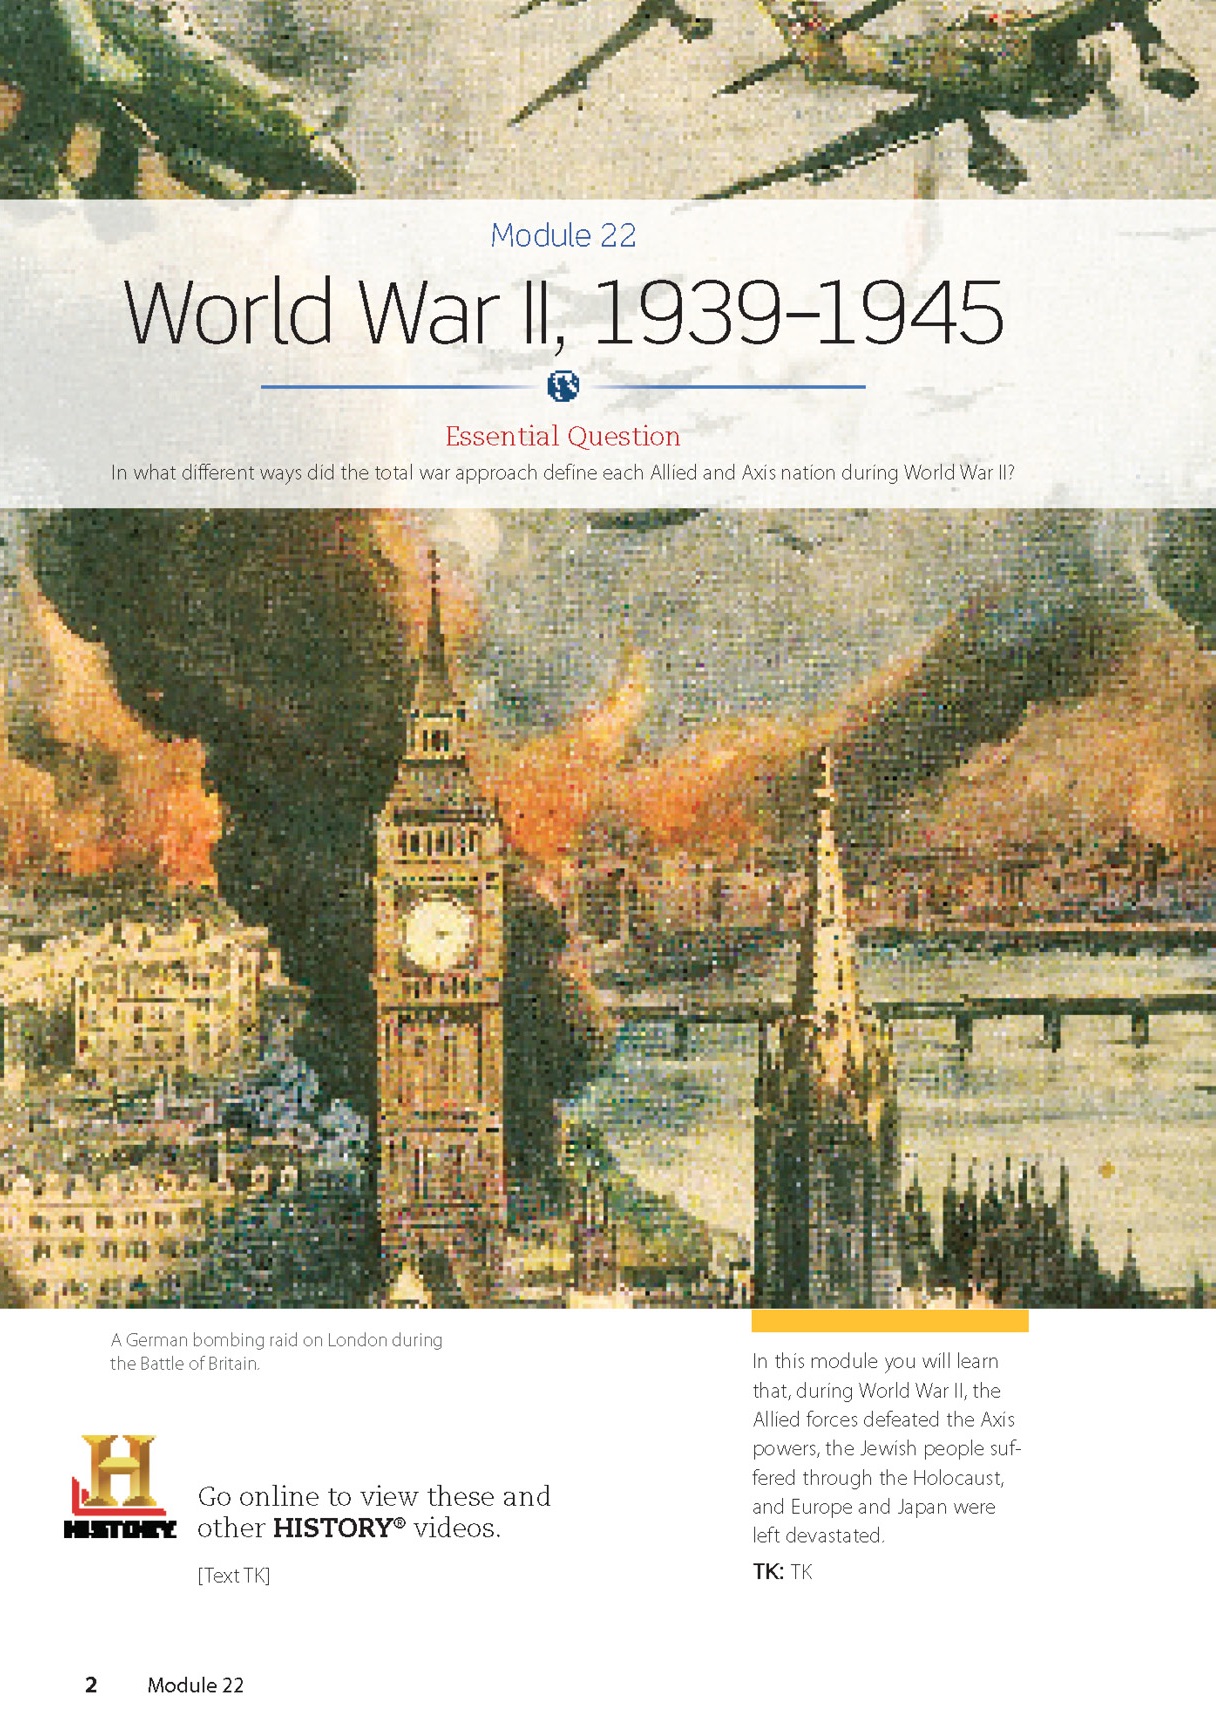 Page from HMH Social Studies book about World War II